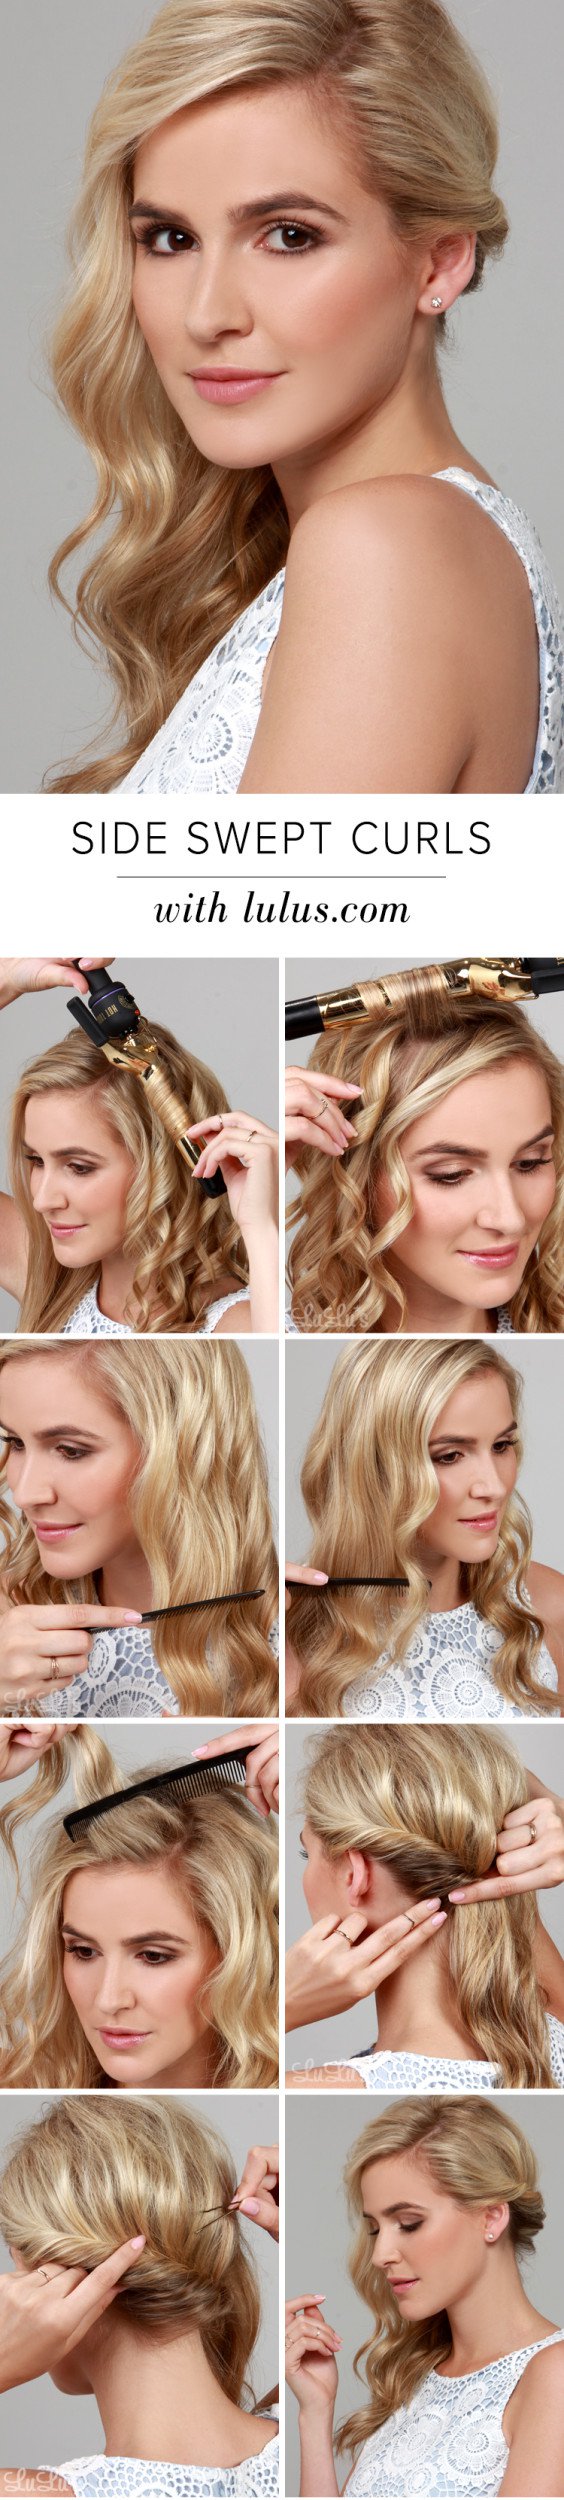 10 Super Creative Tips How To Do Perfect Hairstyle On The Easiest Way